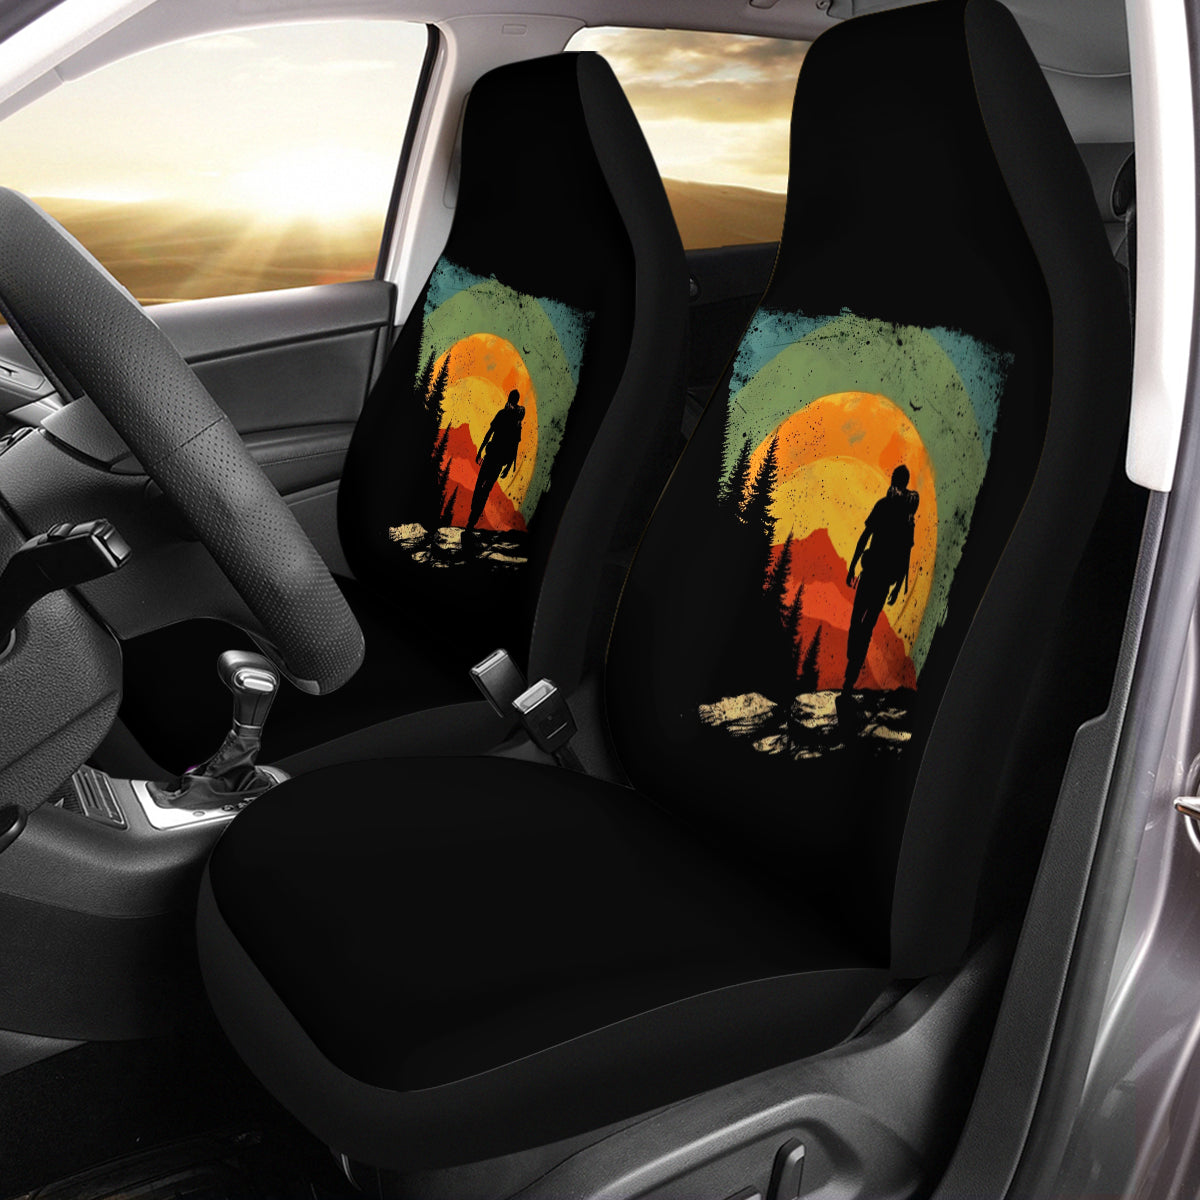 Hiking Car Seat Covers, Gift for Hiker, Car Seat Covers for Hiker, Present for Hiking lover, Trail Walker, Mountain Walker, Hiking 06